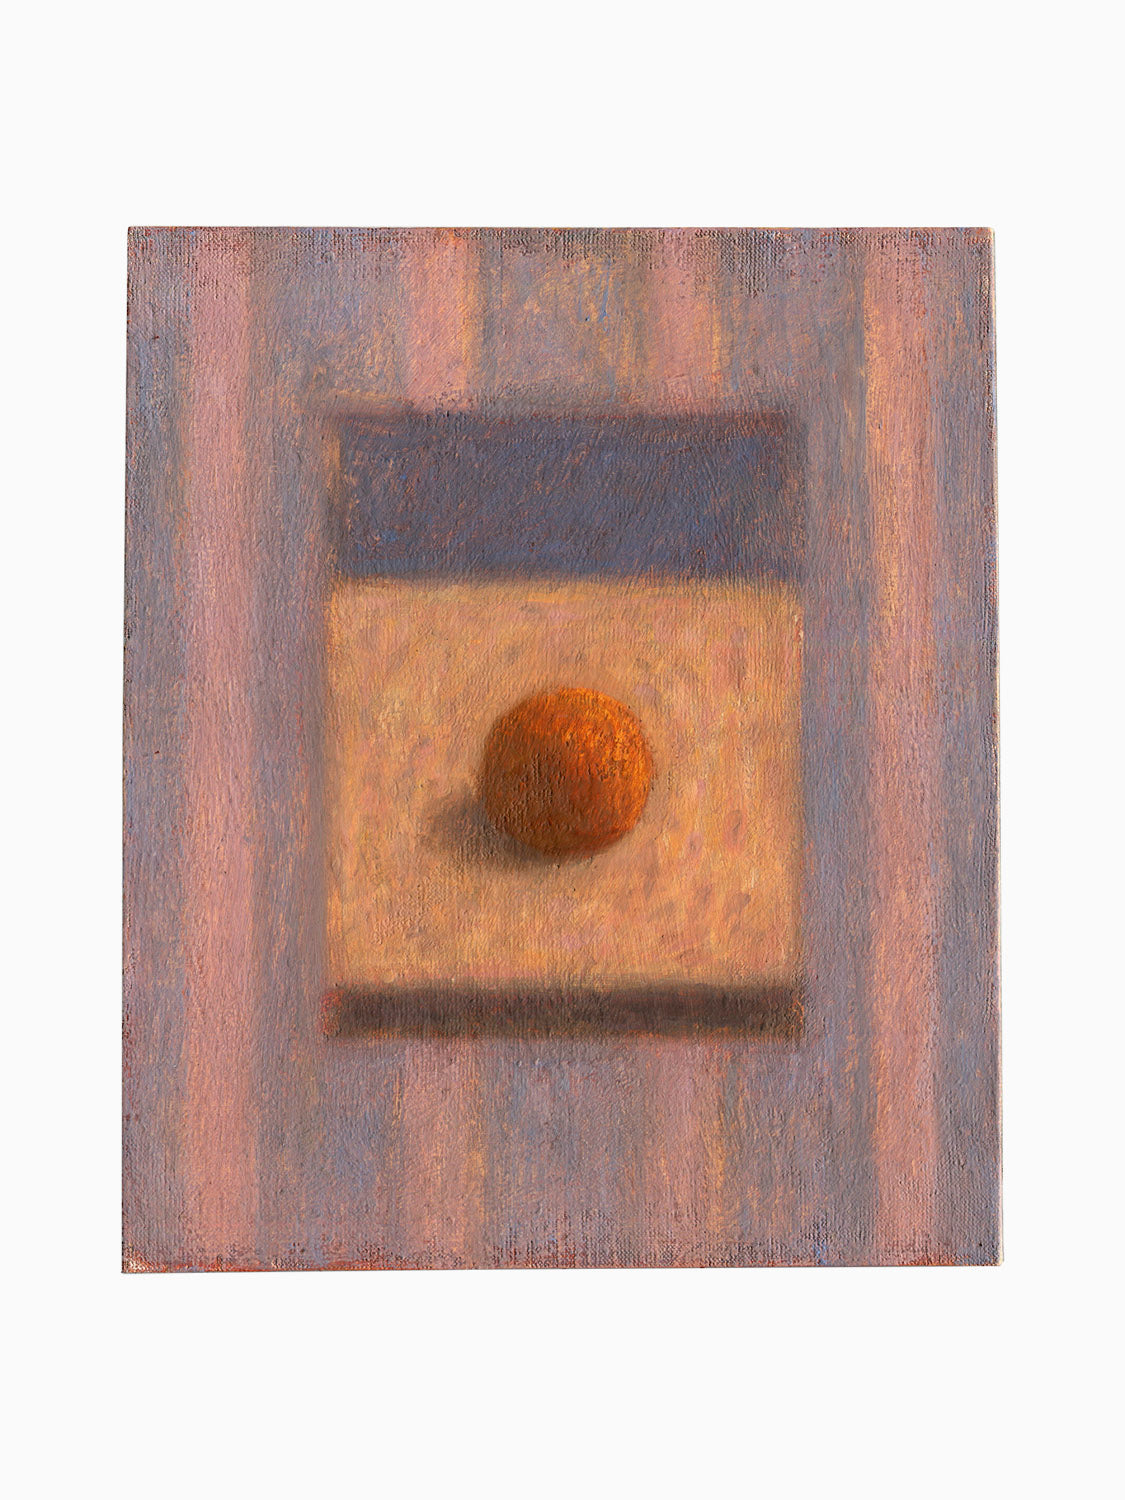 Painting of an Orange on a Wall #1